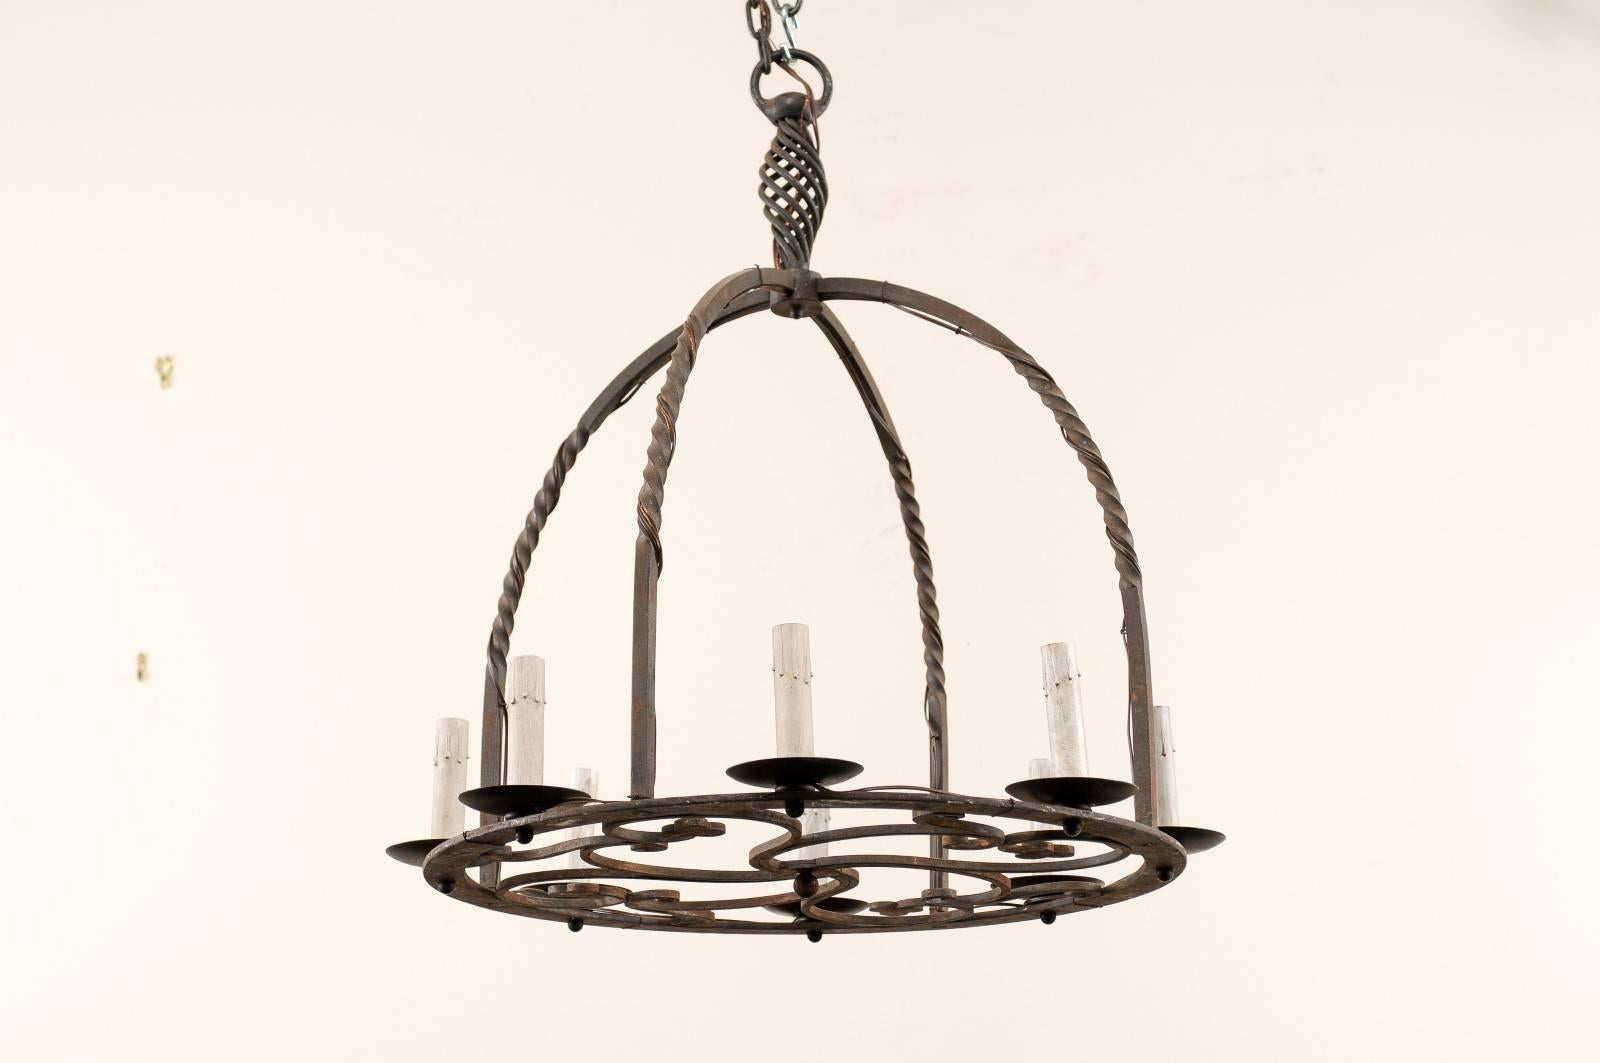 19th Century French 19th C. Circular Eight-Light Iron Chandelier w/ Lovely Domed-Shaped Top